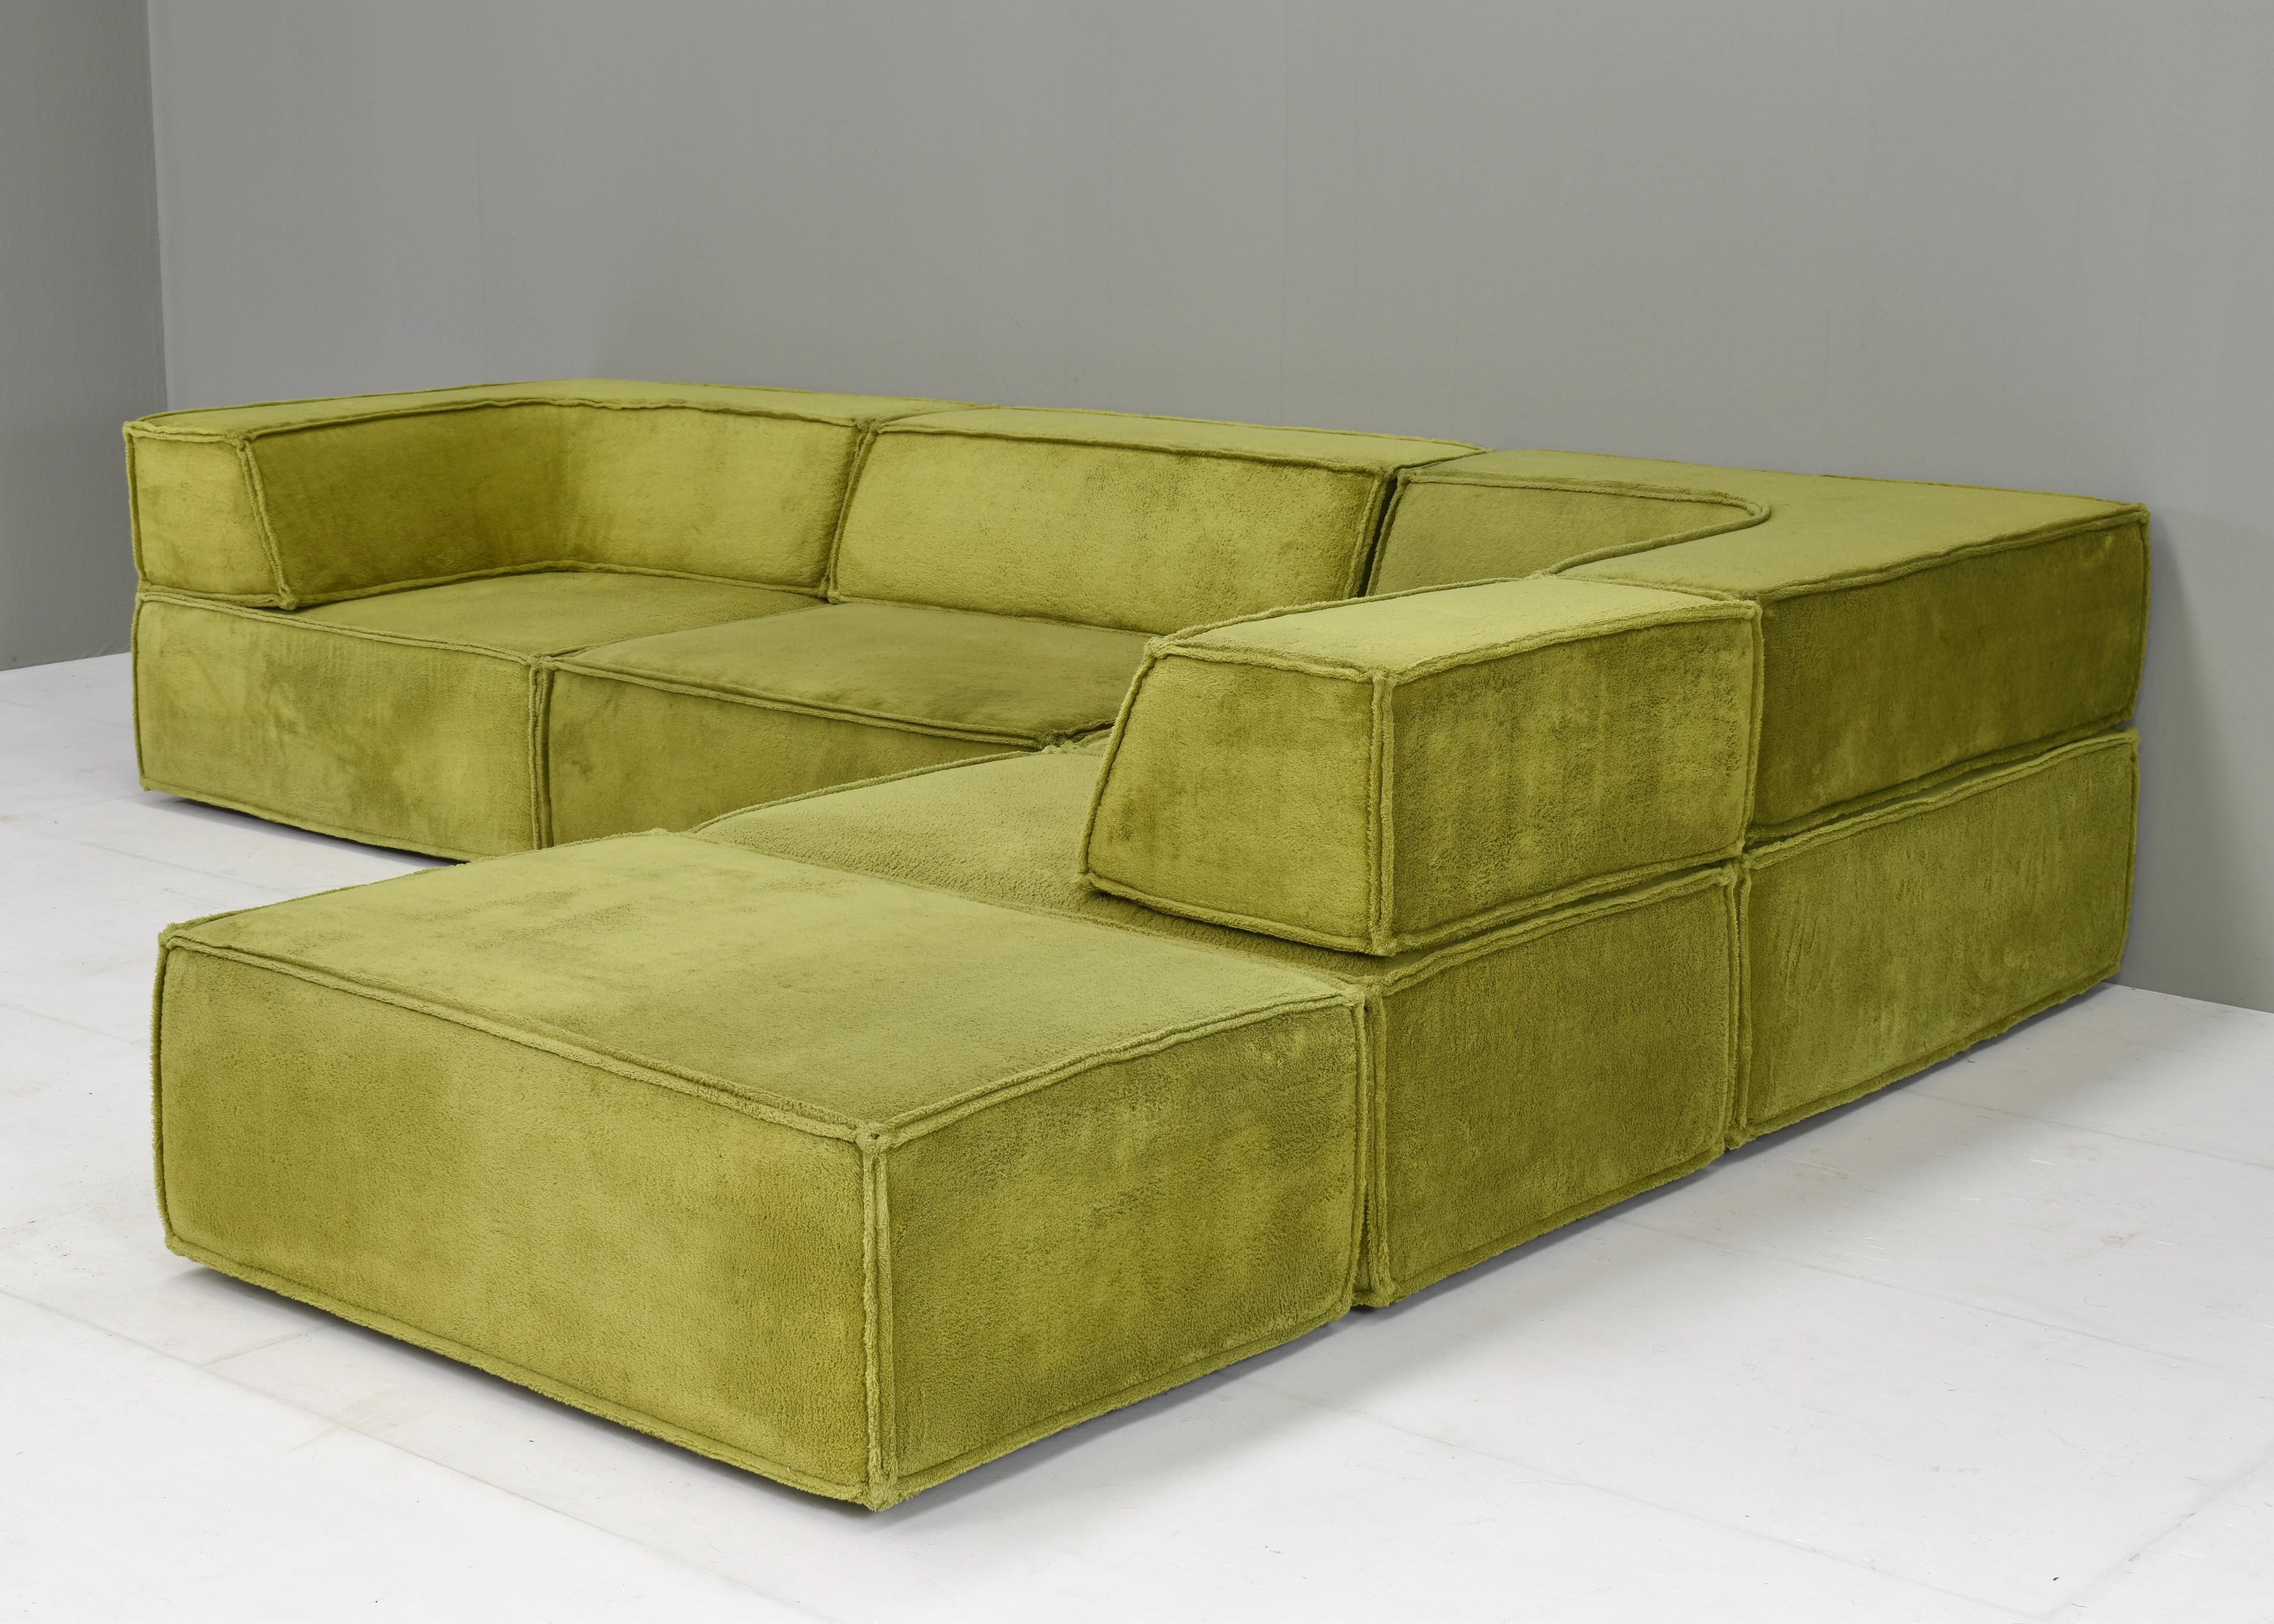 COR Trio Sectional Sofa by Team Form Ag for COR, Germany / Switzerland, 1972 3